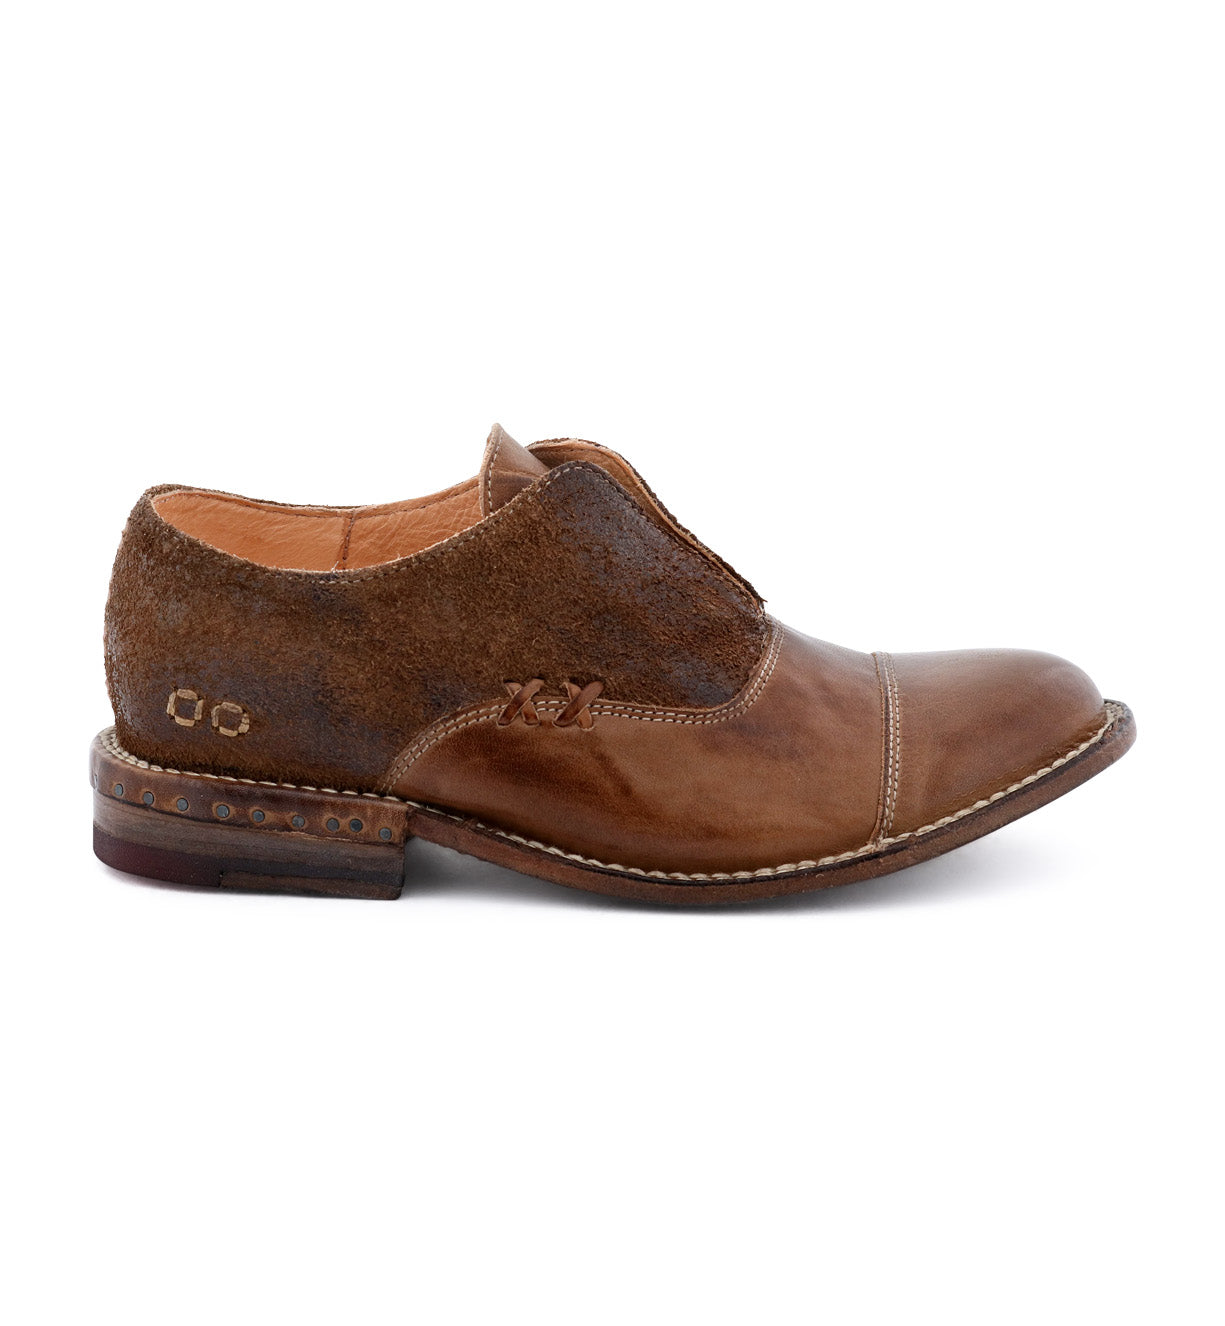 A men's brown Bed Stu Rose oxford shoe with a leather sole.